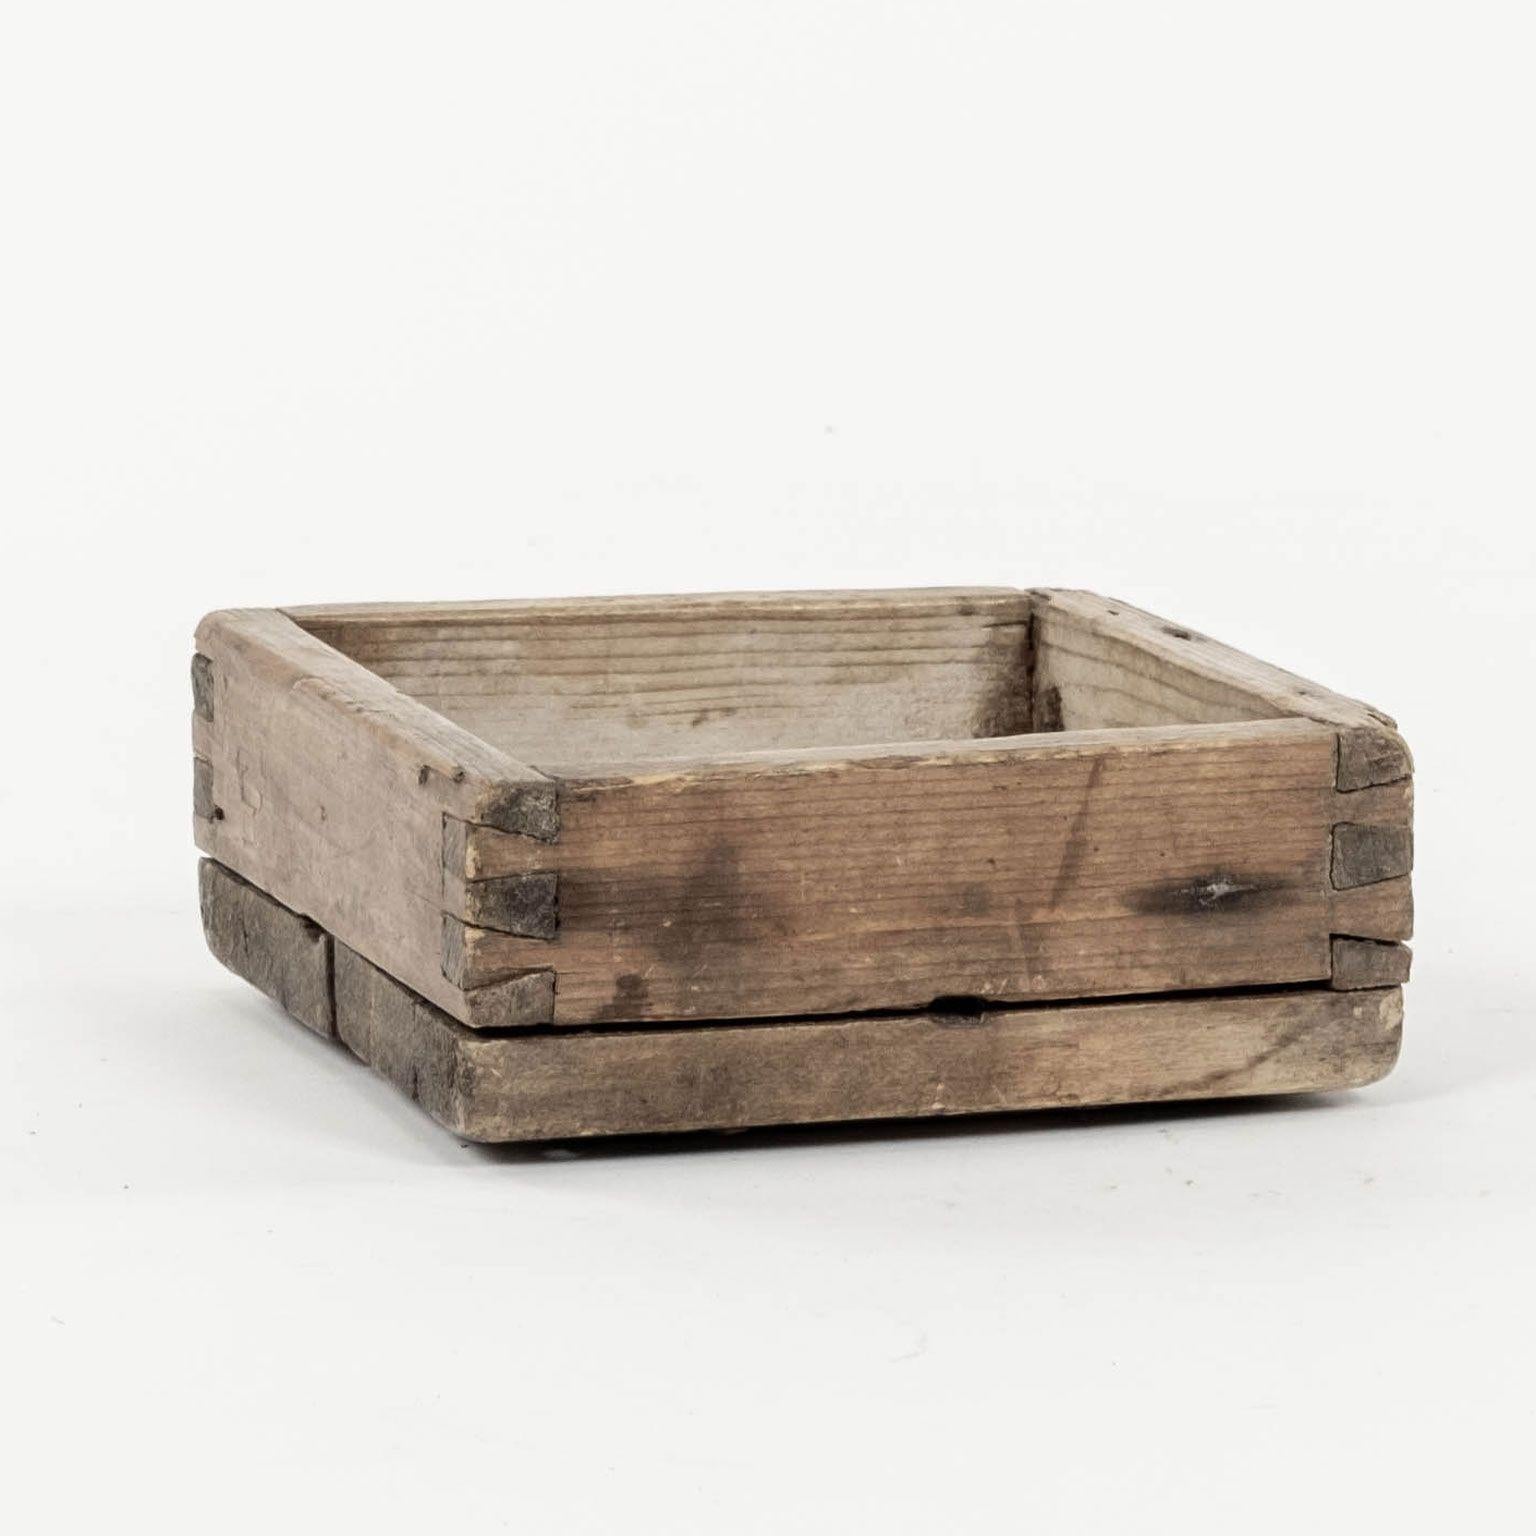 Swedish butter box with zig-zag design carved imprint. Light colored faded wooden finish.

Note: Due to regional changes in humidity and climate during shipping, antique wood may shrink and/or split along its grain, veneer may loosen or peel, and